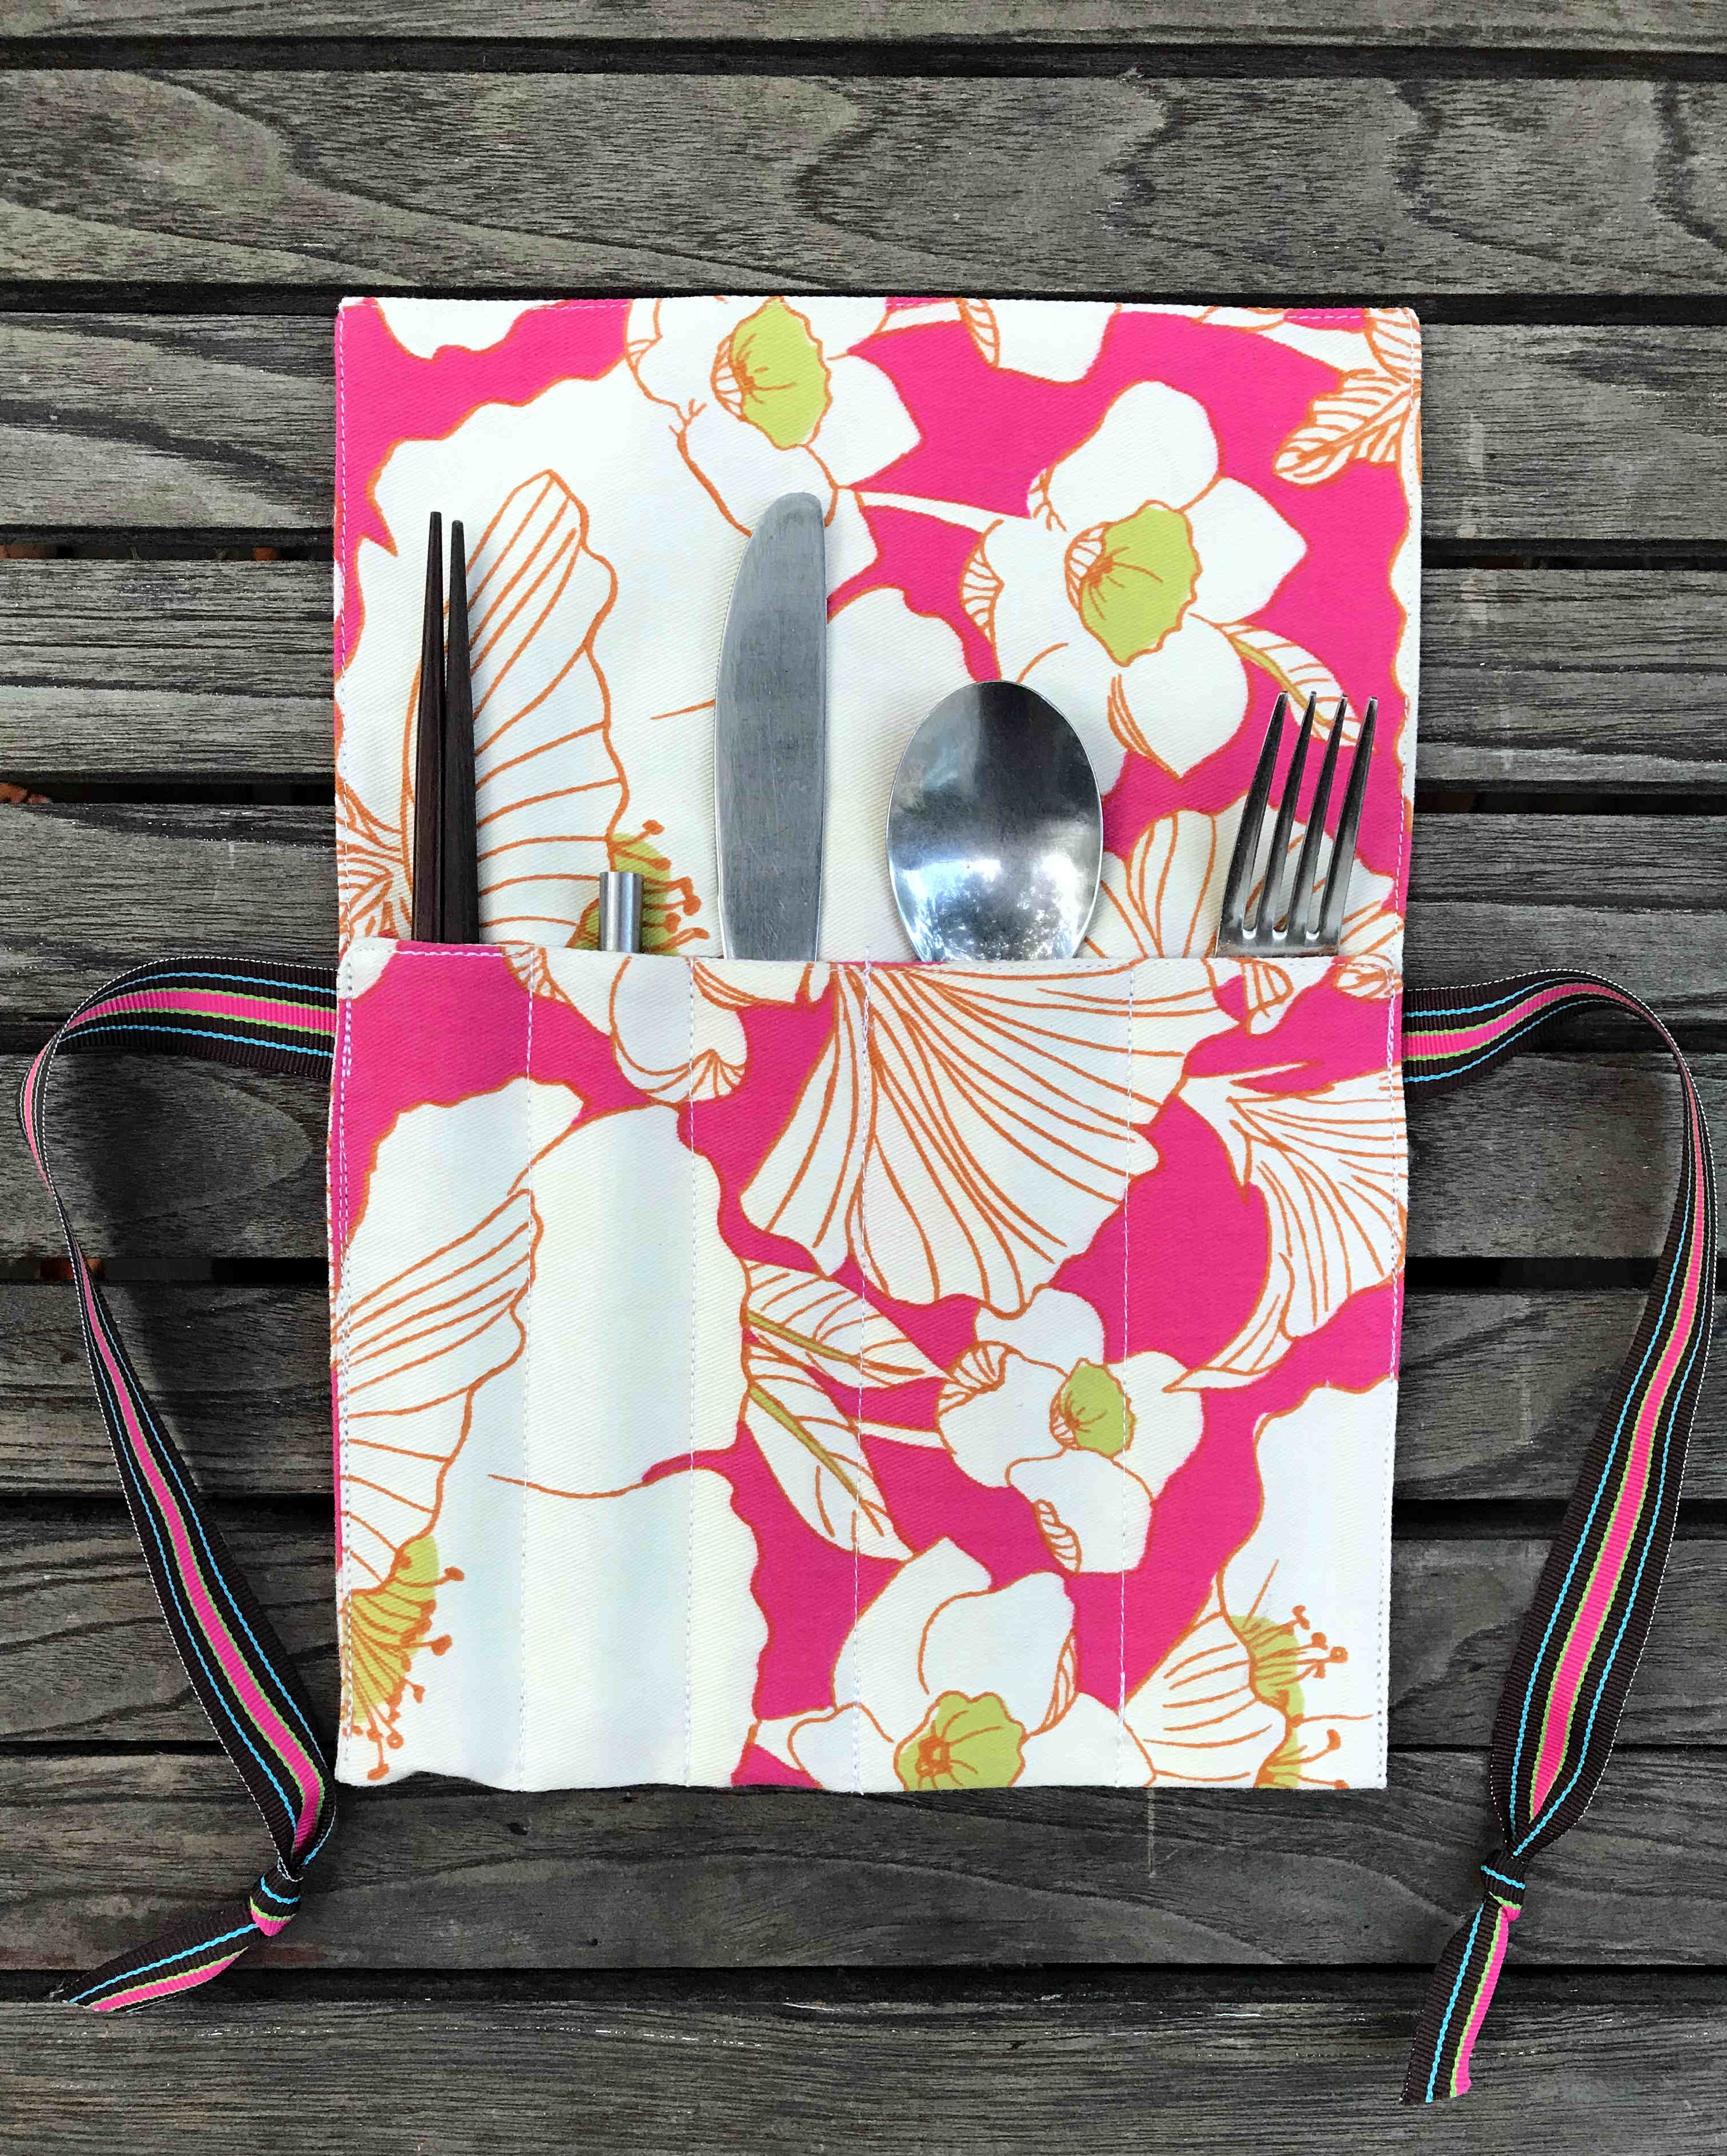 a floral patterned utensil roll for carrying cutlery and avoiding single-use plastic